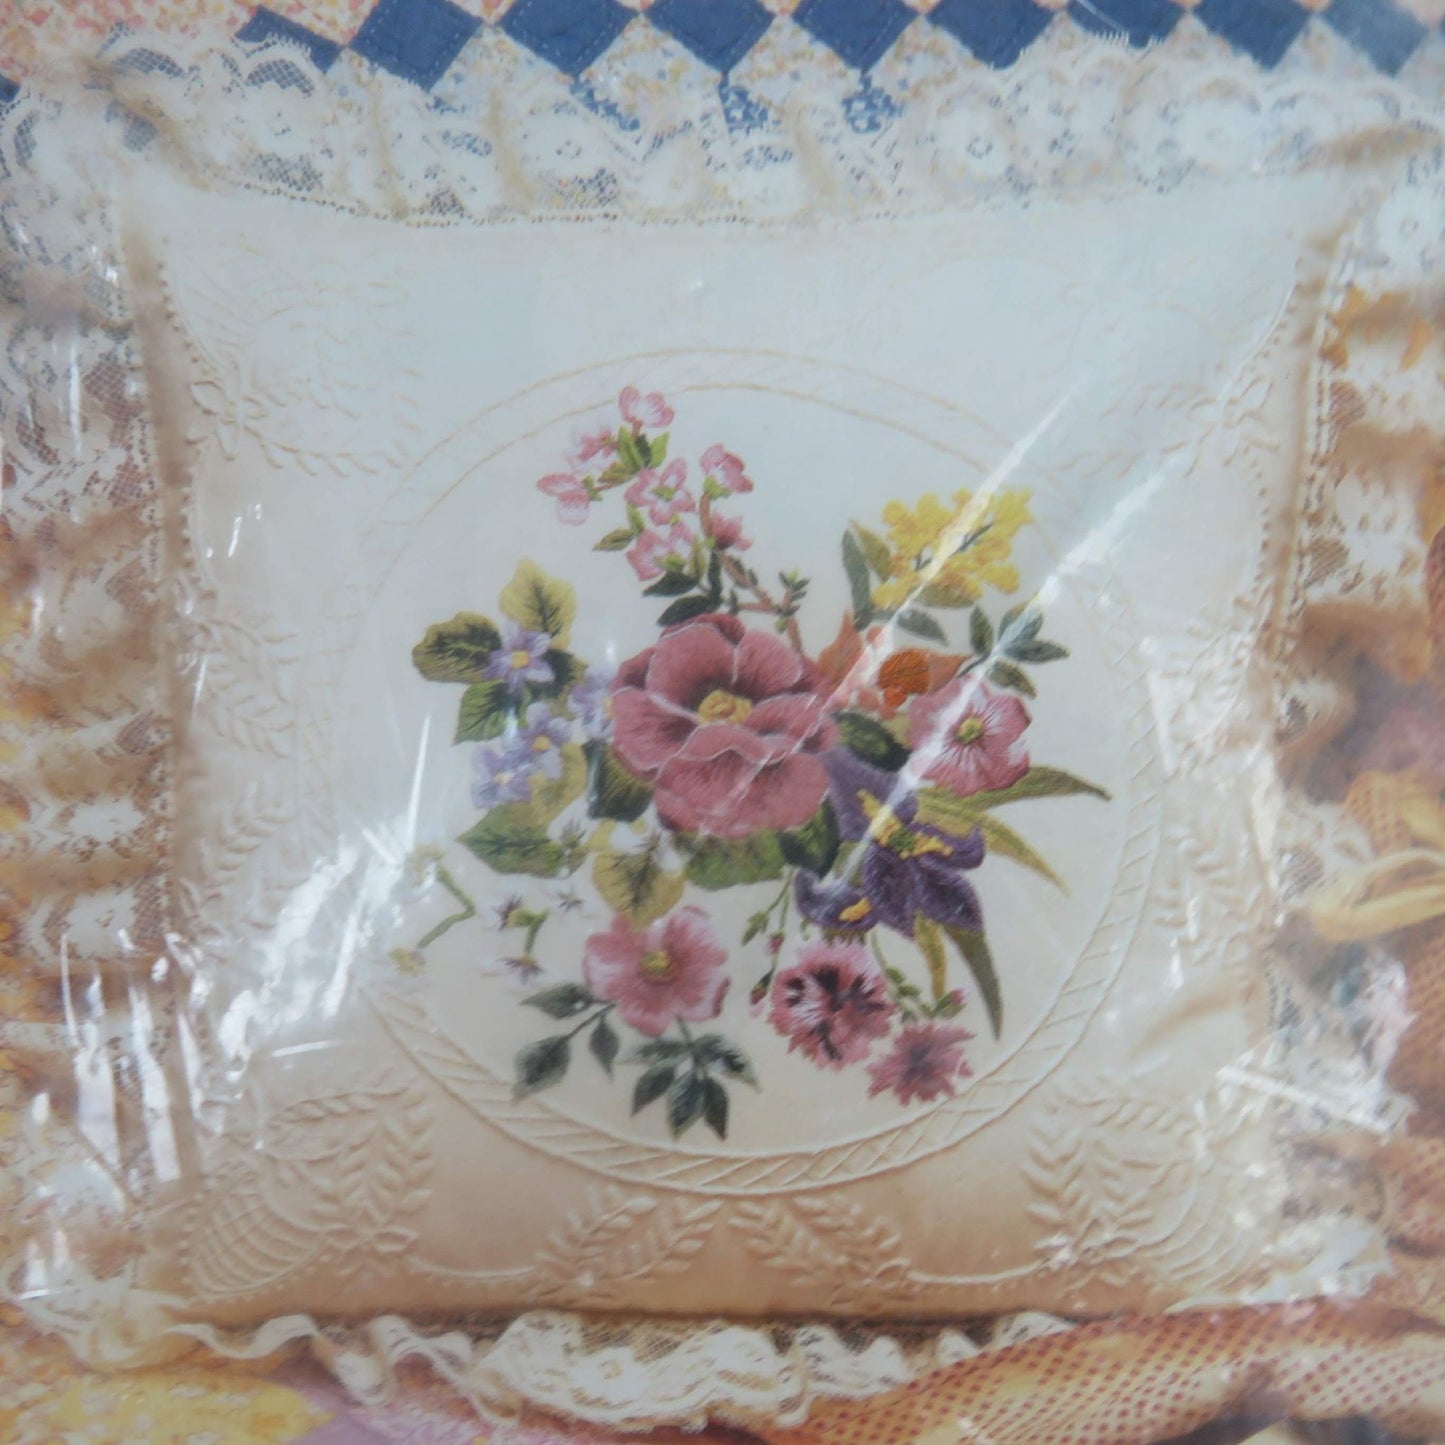 Vintage Candamar Designs Candlewicking Embroidery Floral Bouquet Pillow 14 Inch